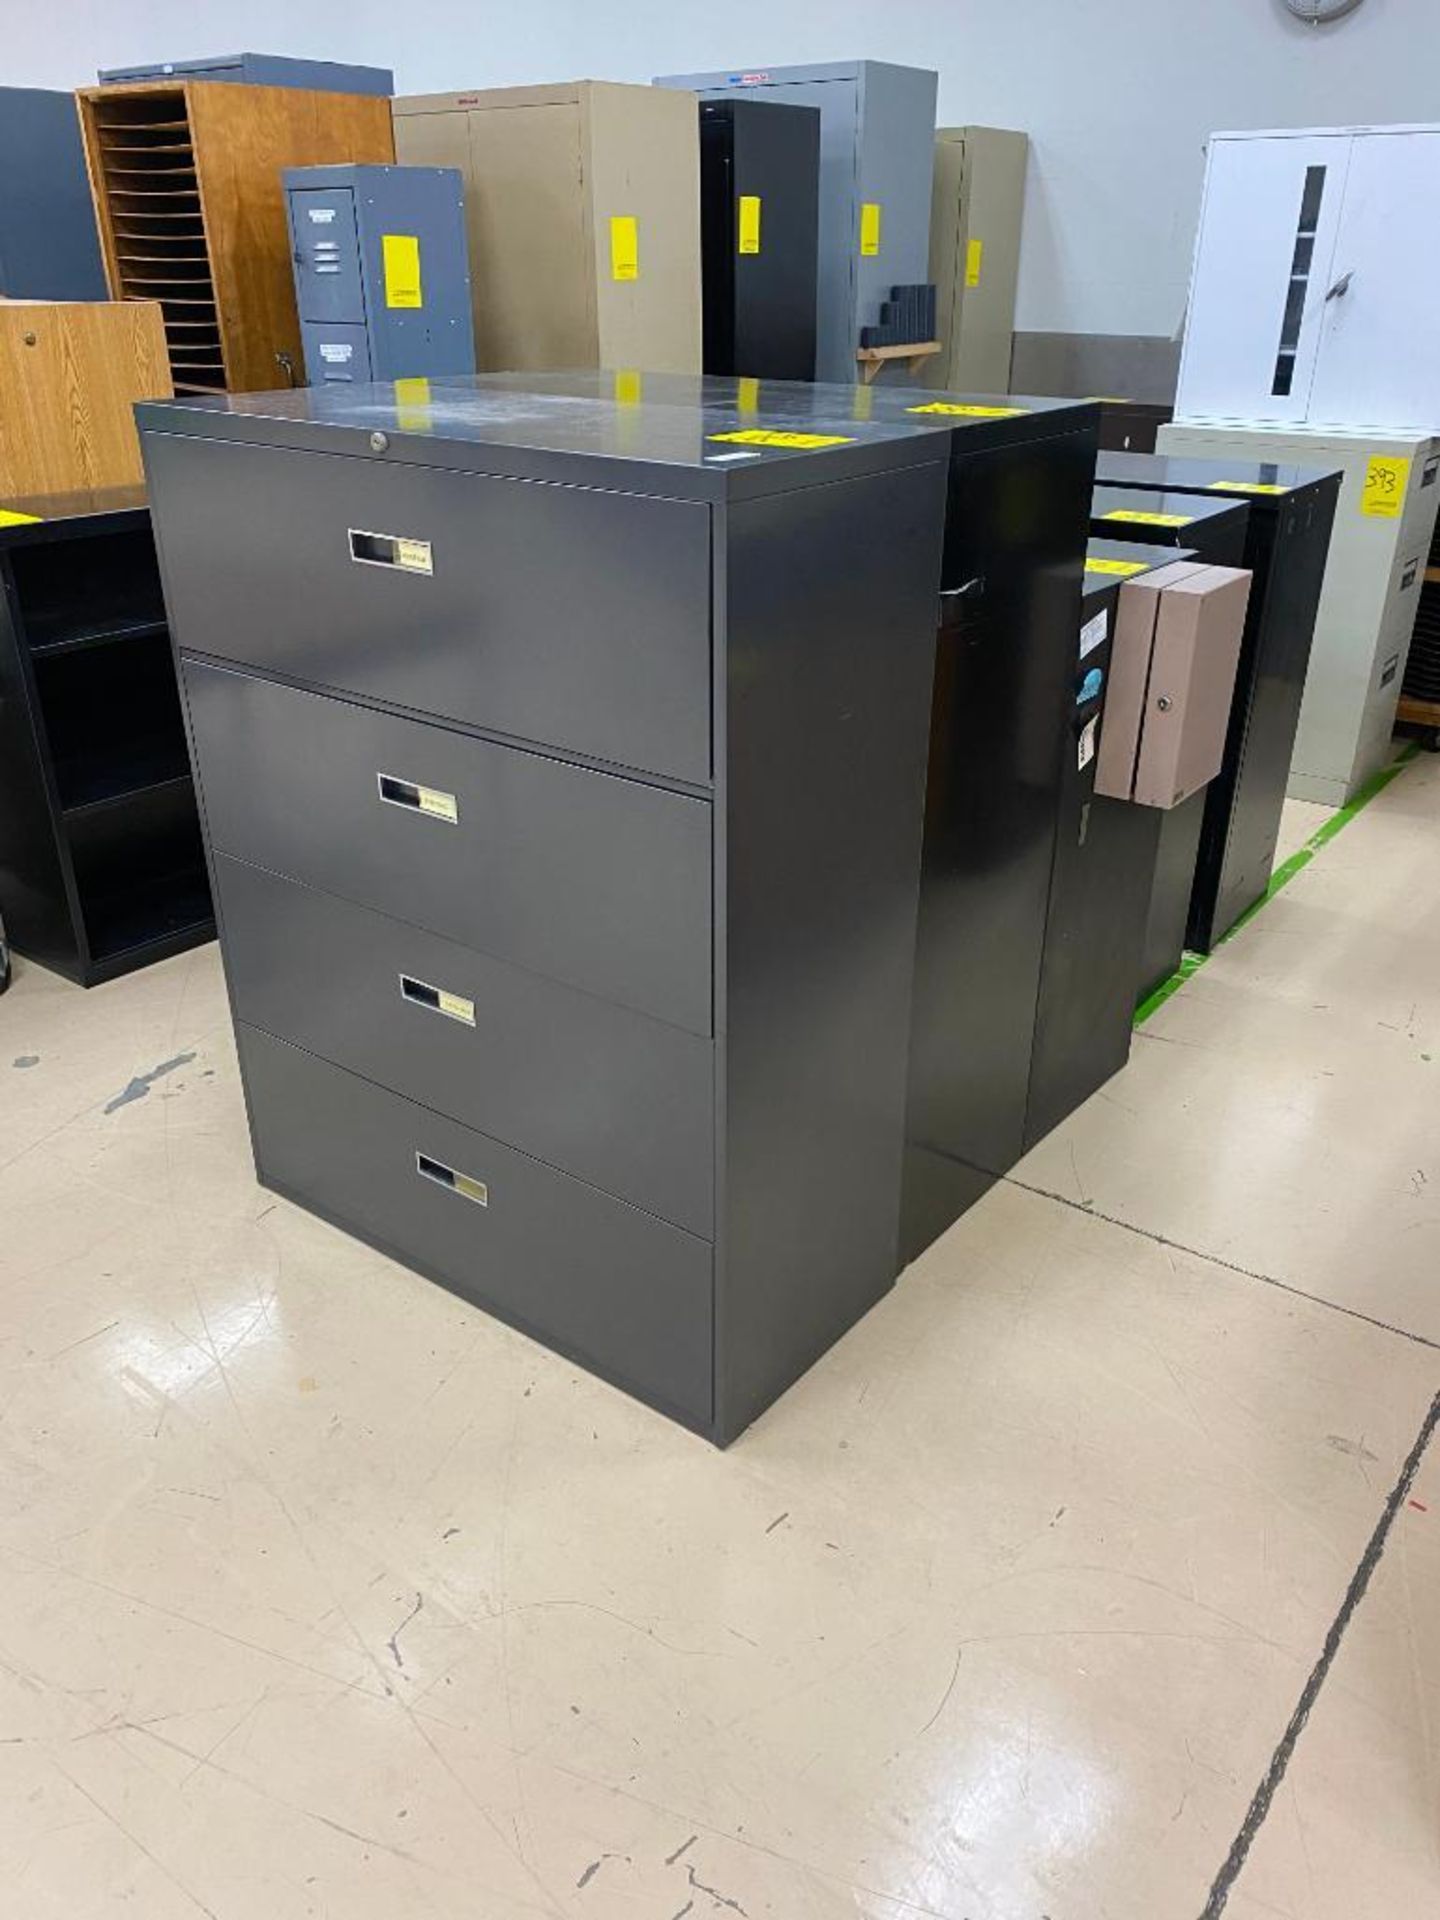 (2) WIDE FILING CABINETS, (3) CABINETS